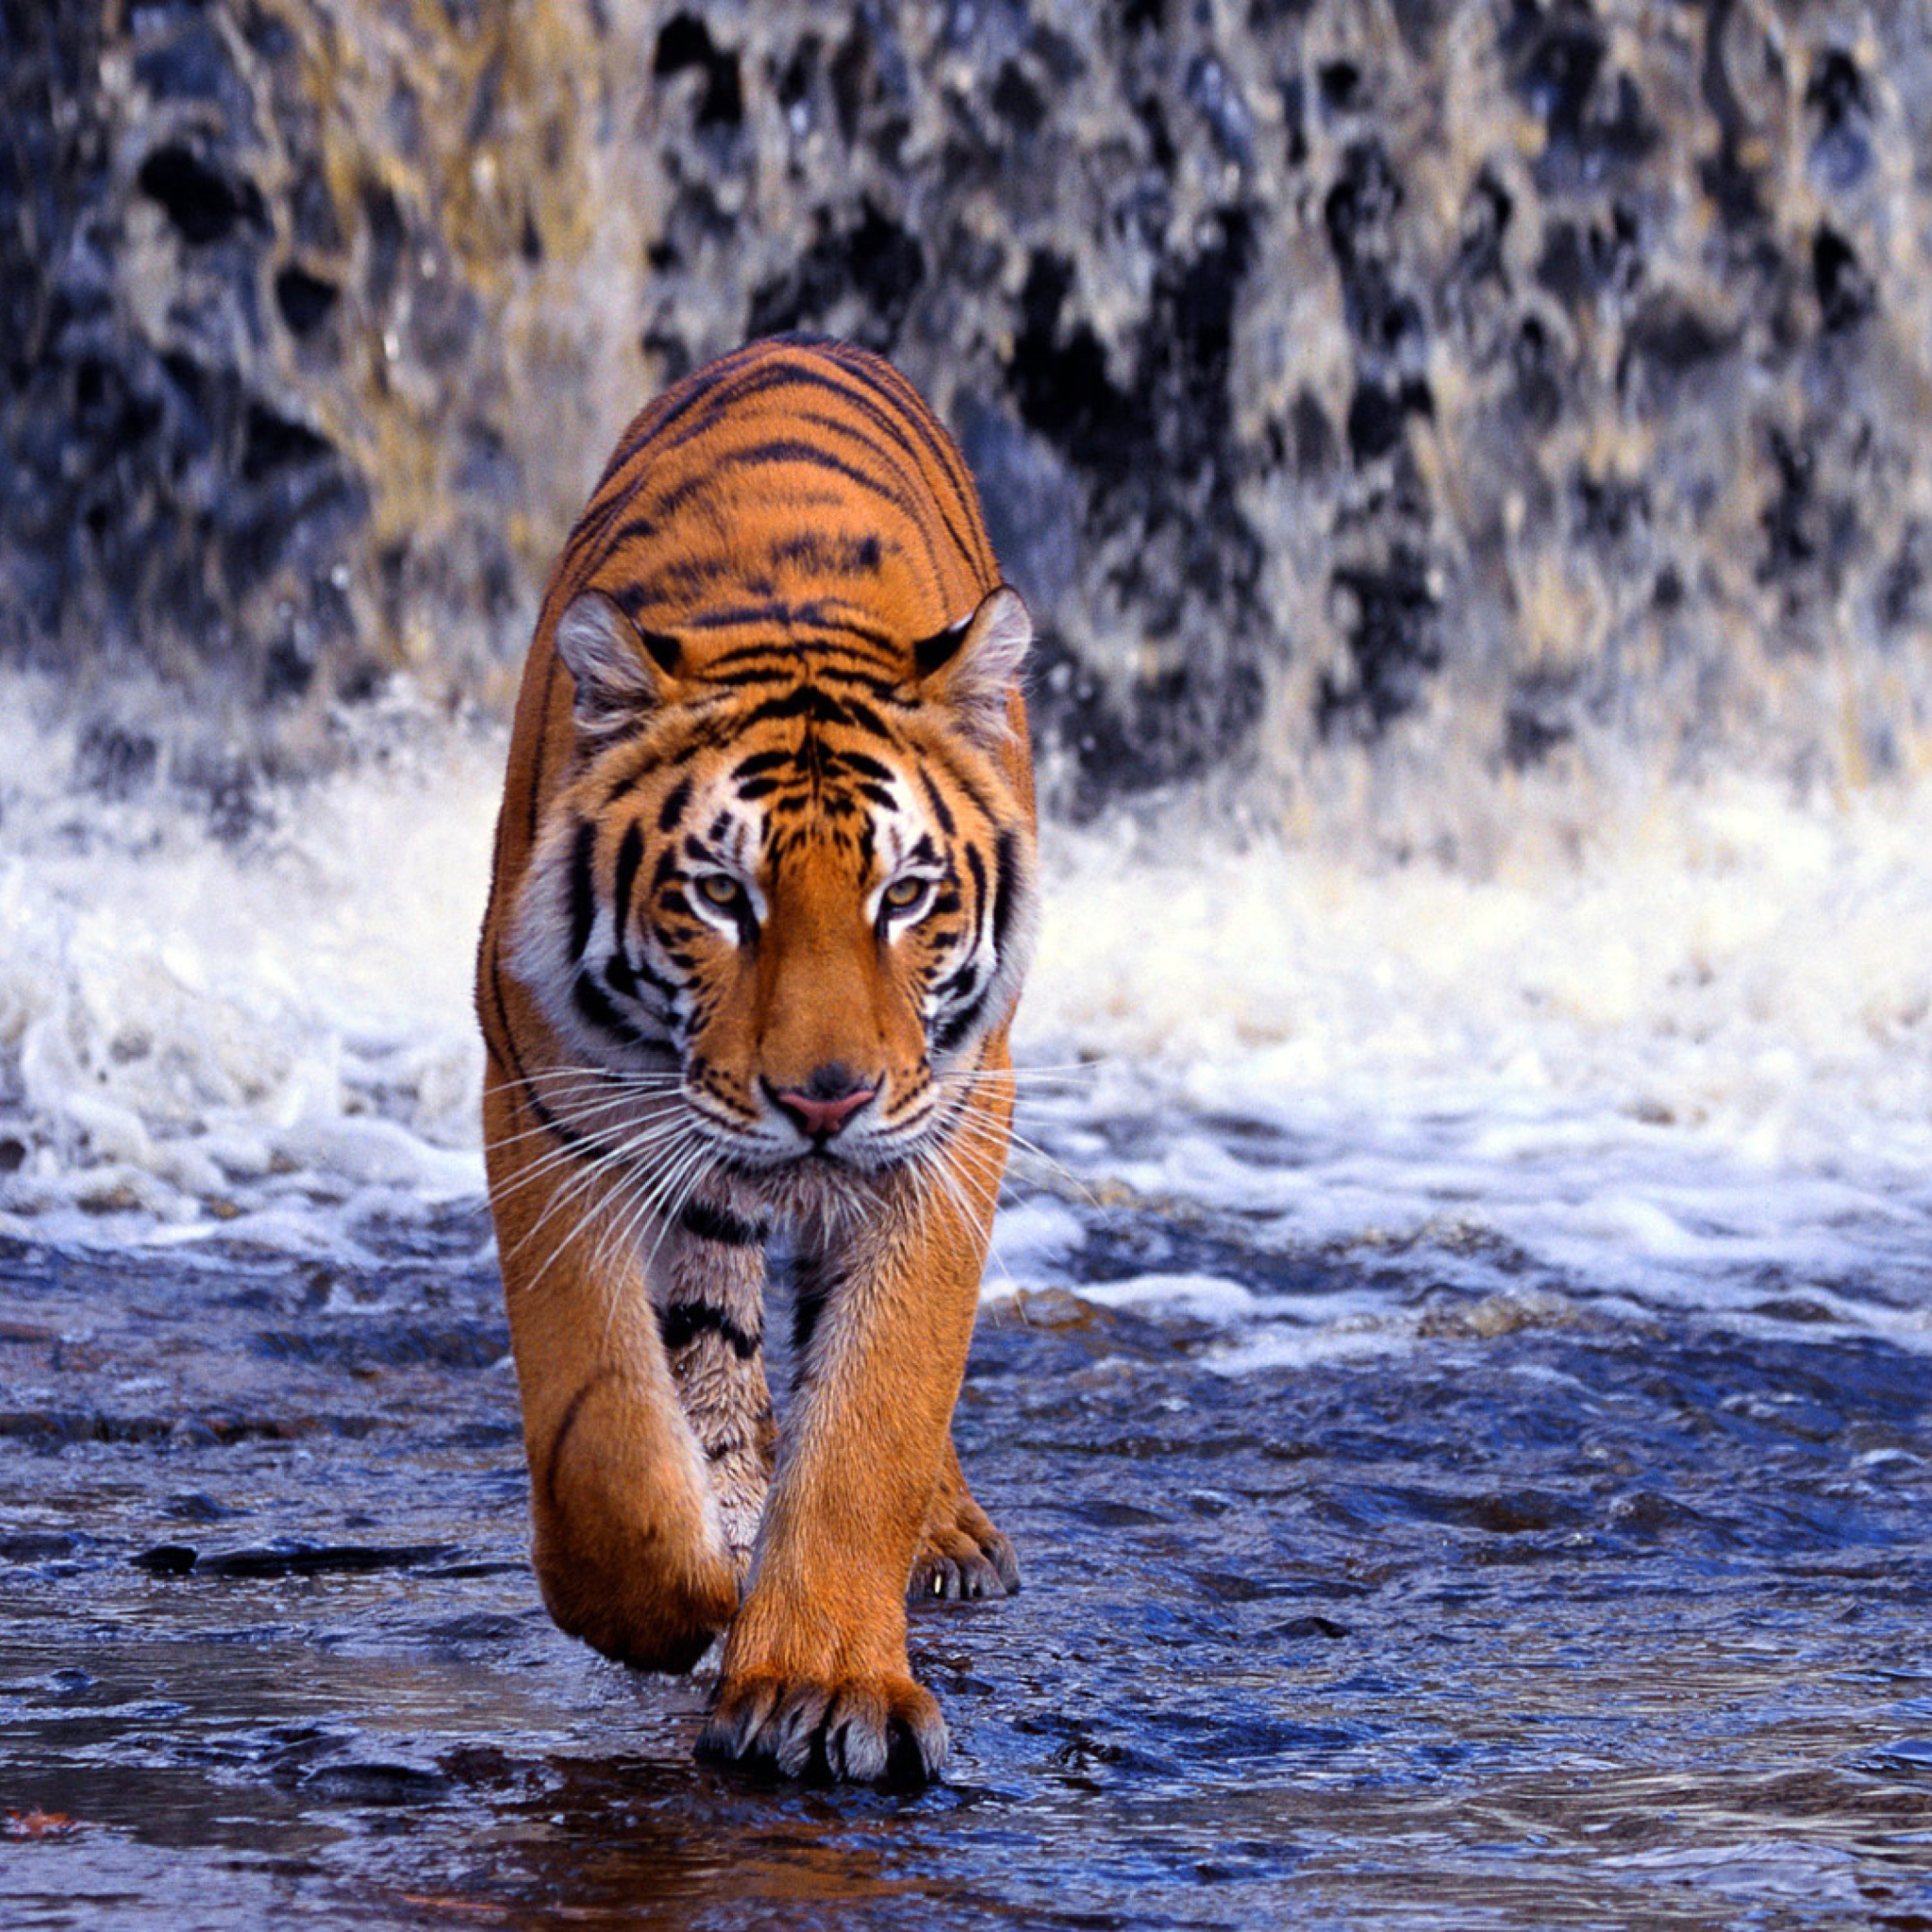 Tiger In Front Of Waterfall wallpaper 2048x2048